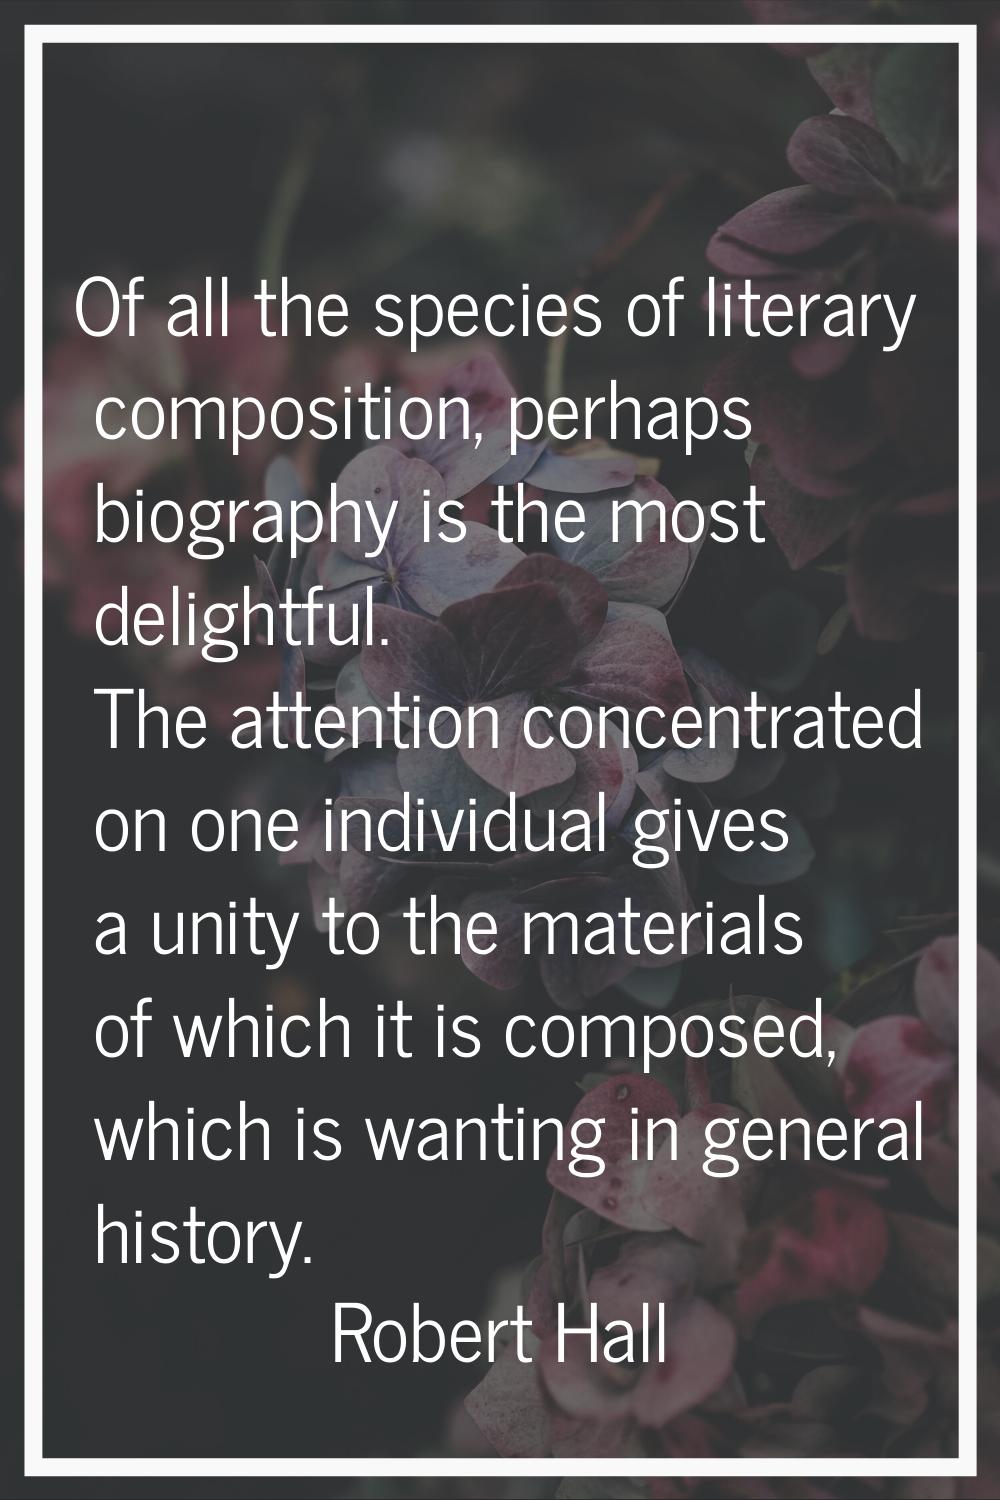 Of all the species of literary composition, perhaps biography is the most delightful. The attention